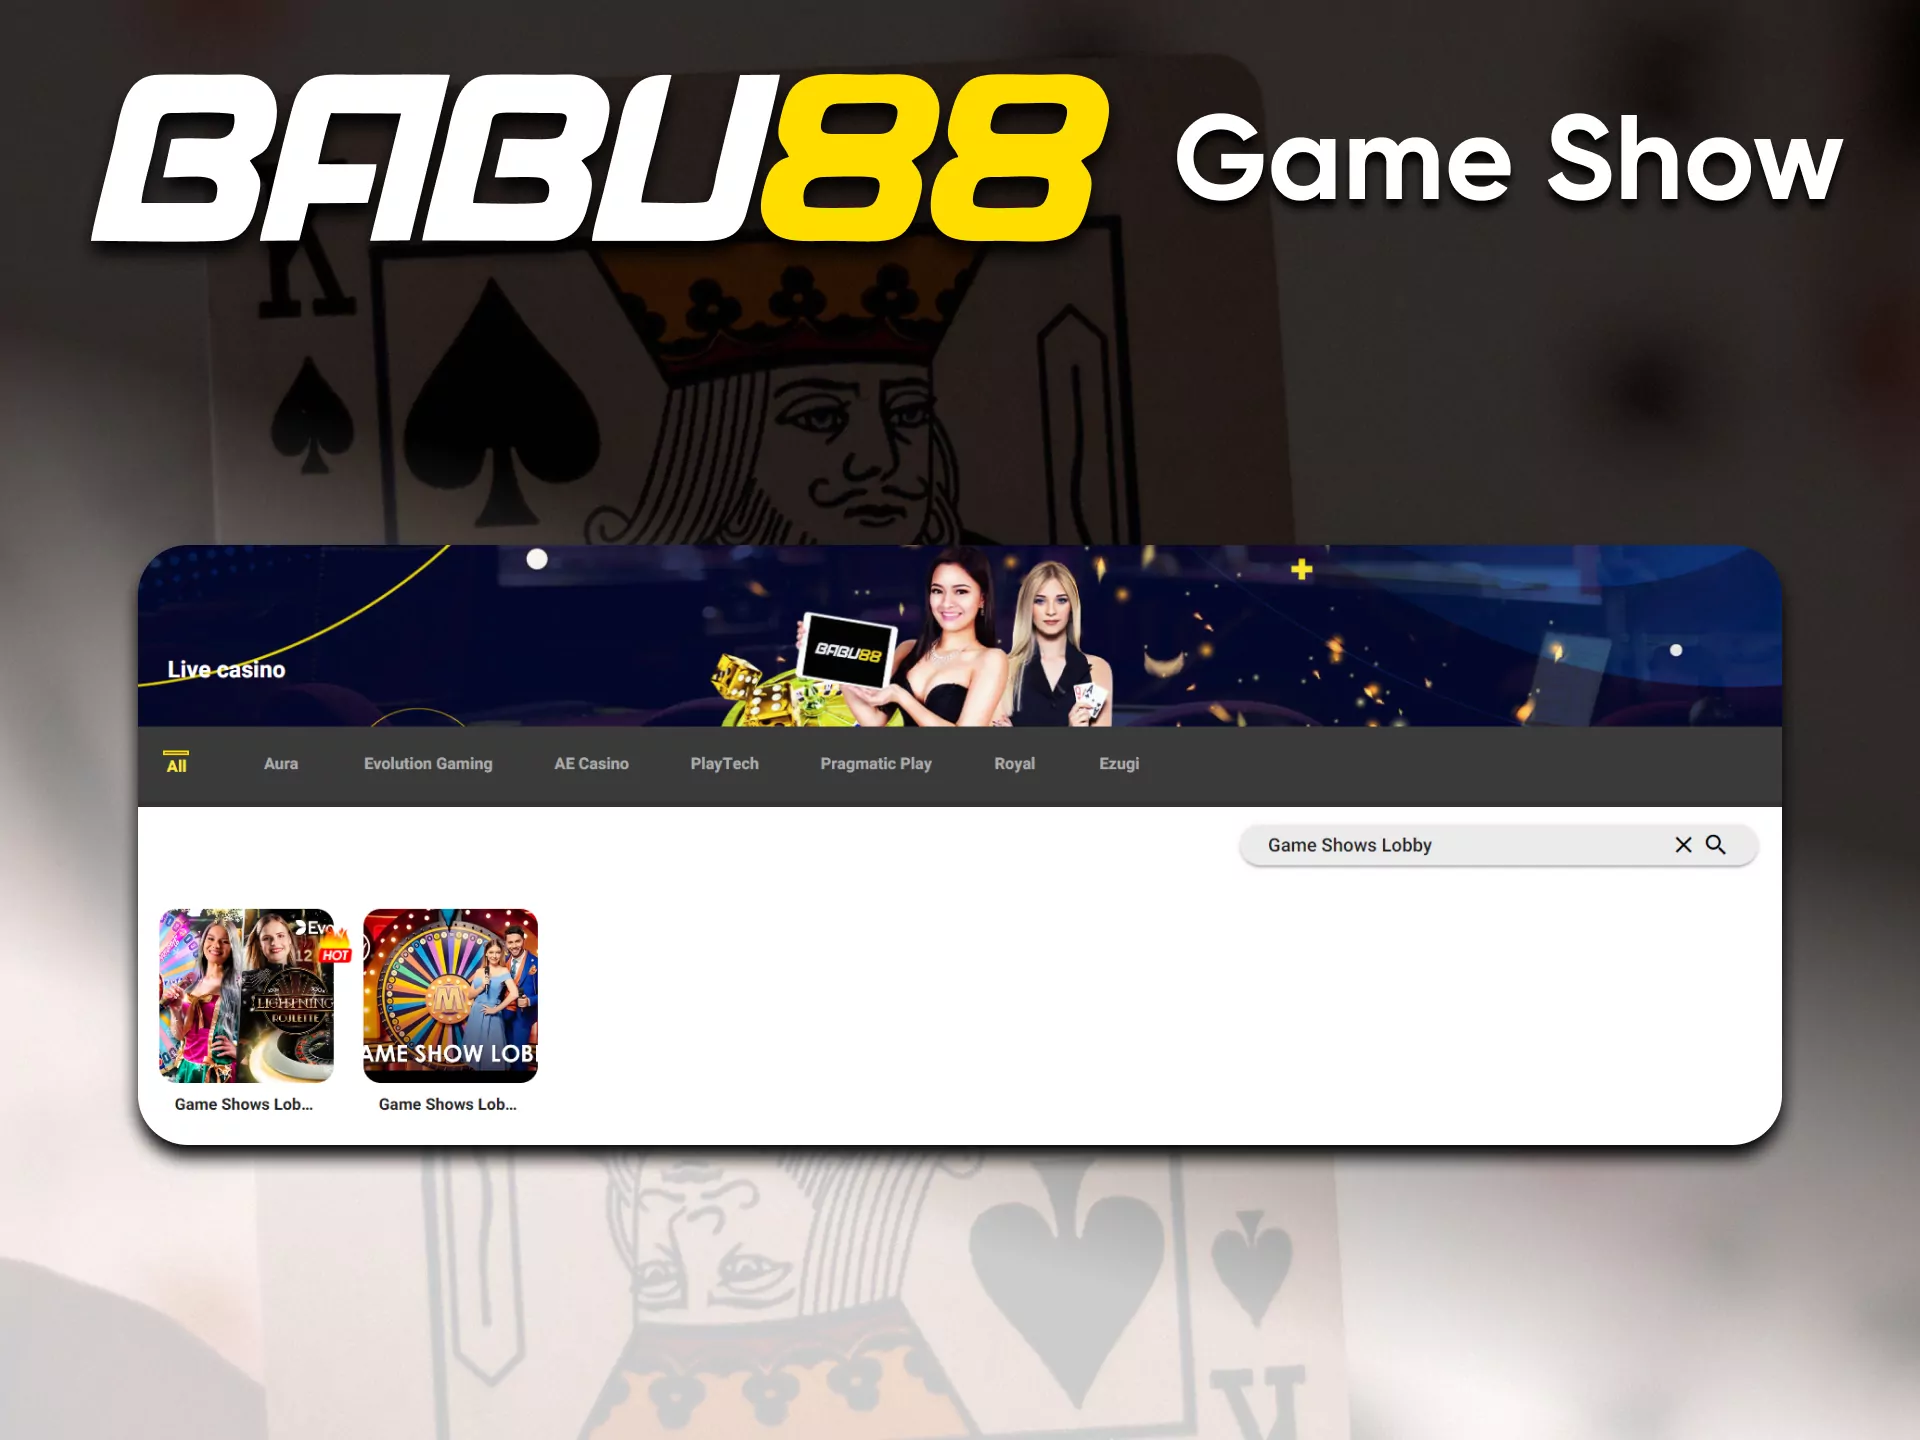 On the Babu88 you can play Game Shows.